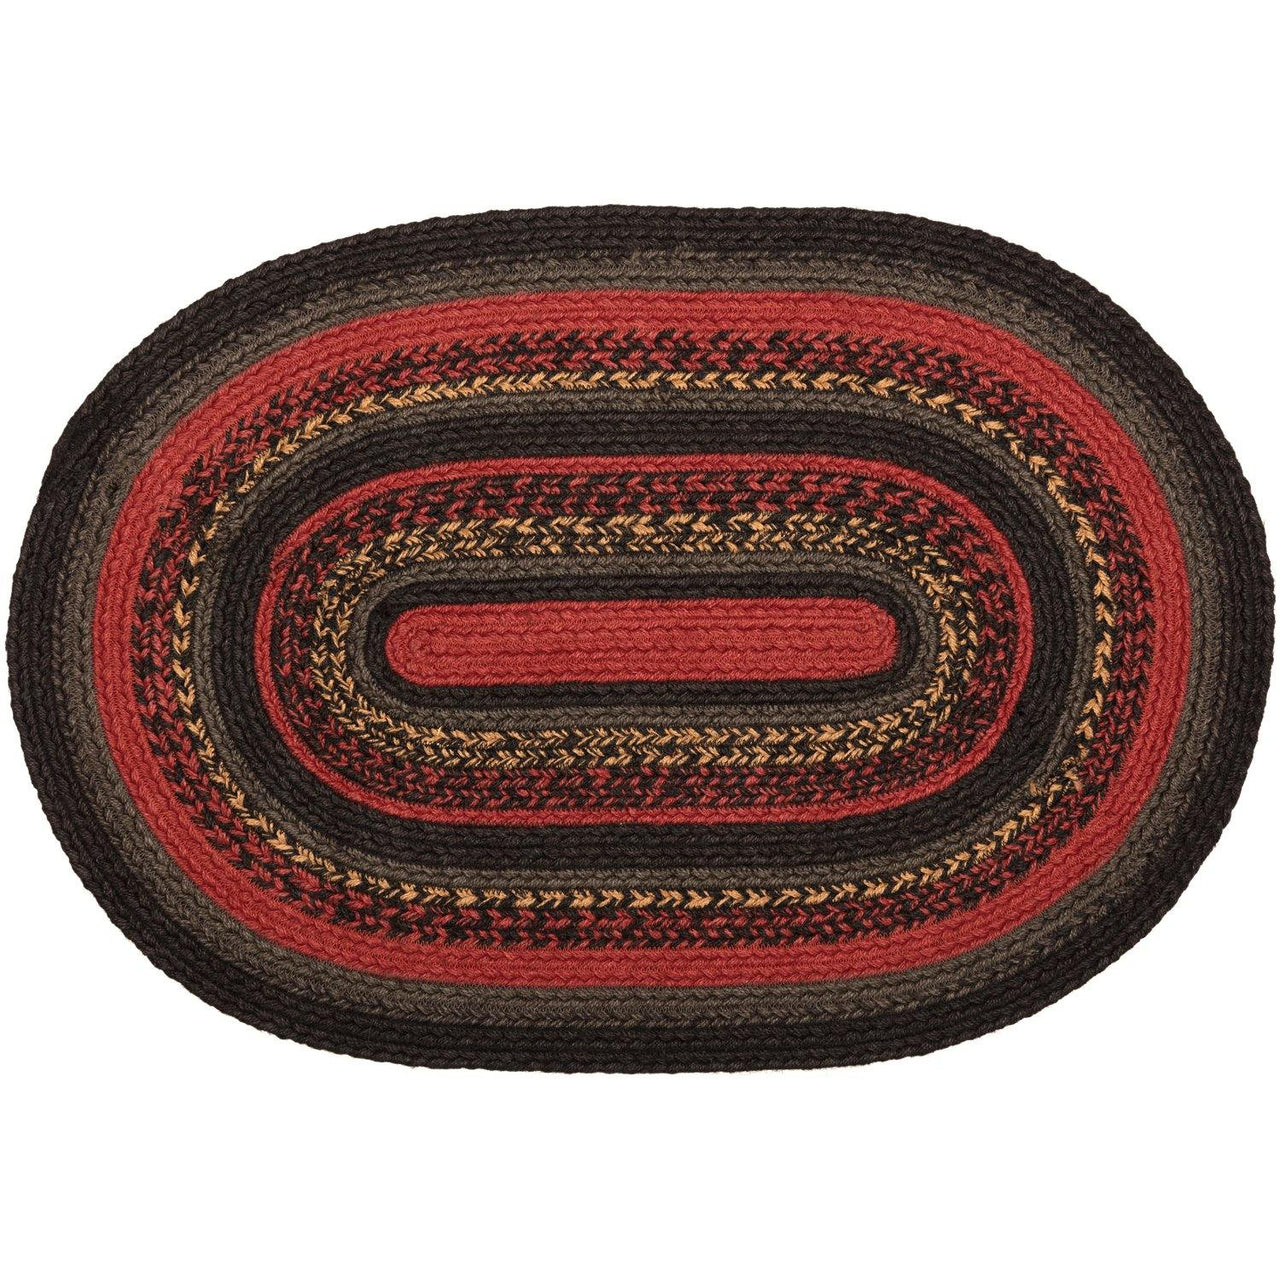 Cumberland Jute Braided Rug Oval 20"x30" with Rug Pad VHC Brands - The Fox Decor